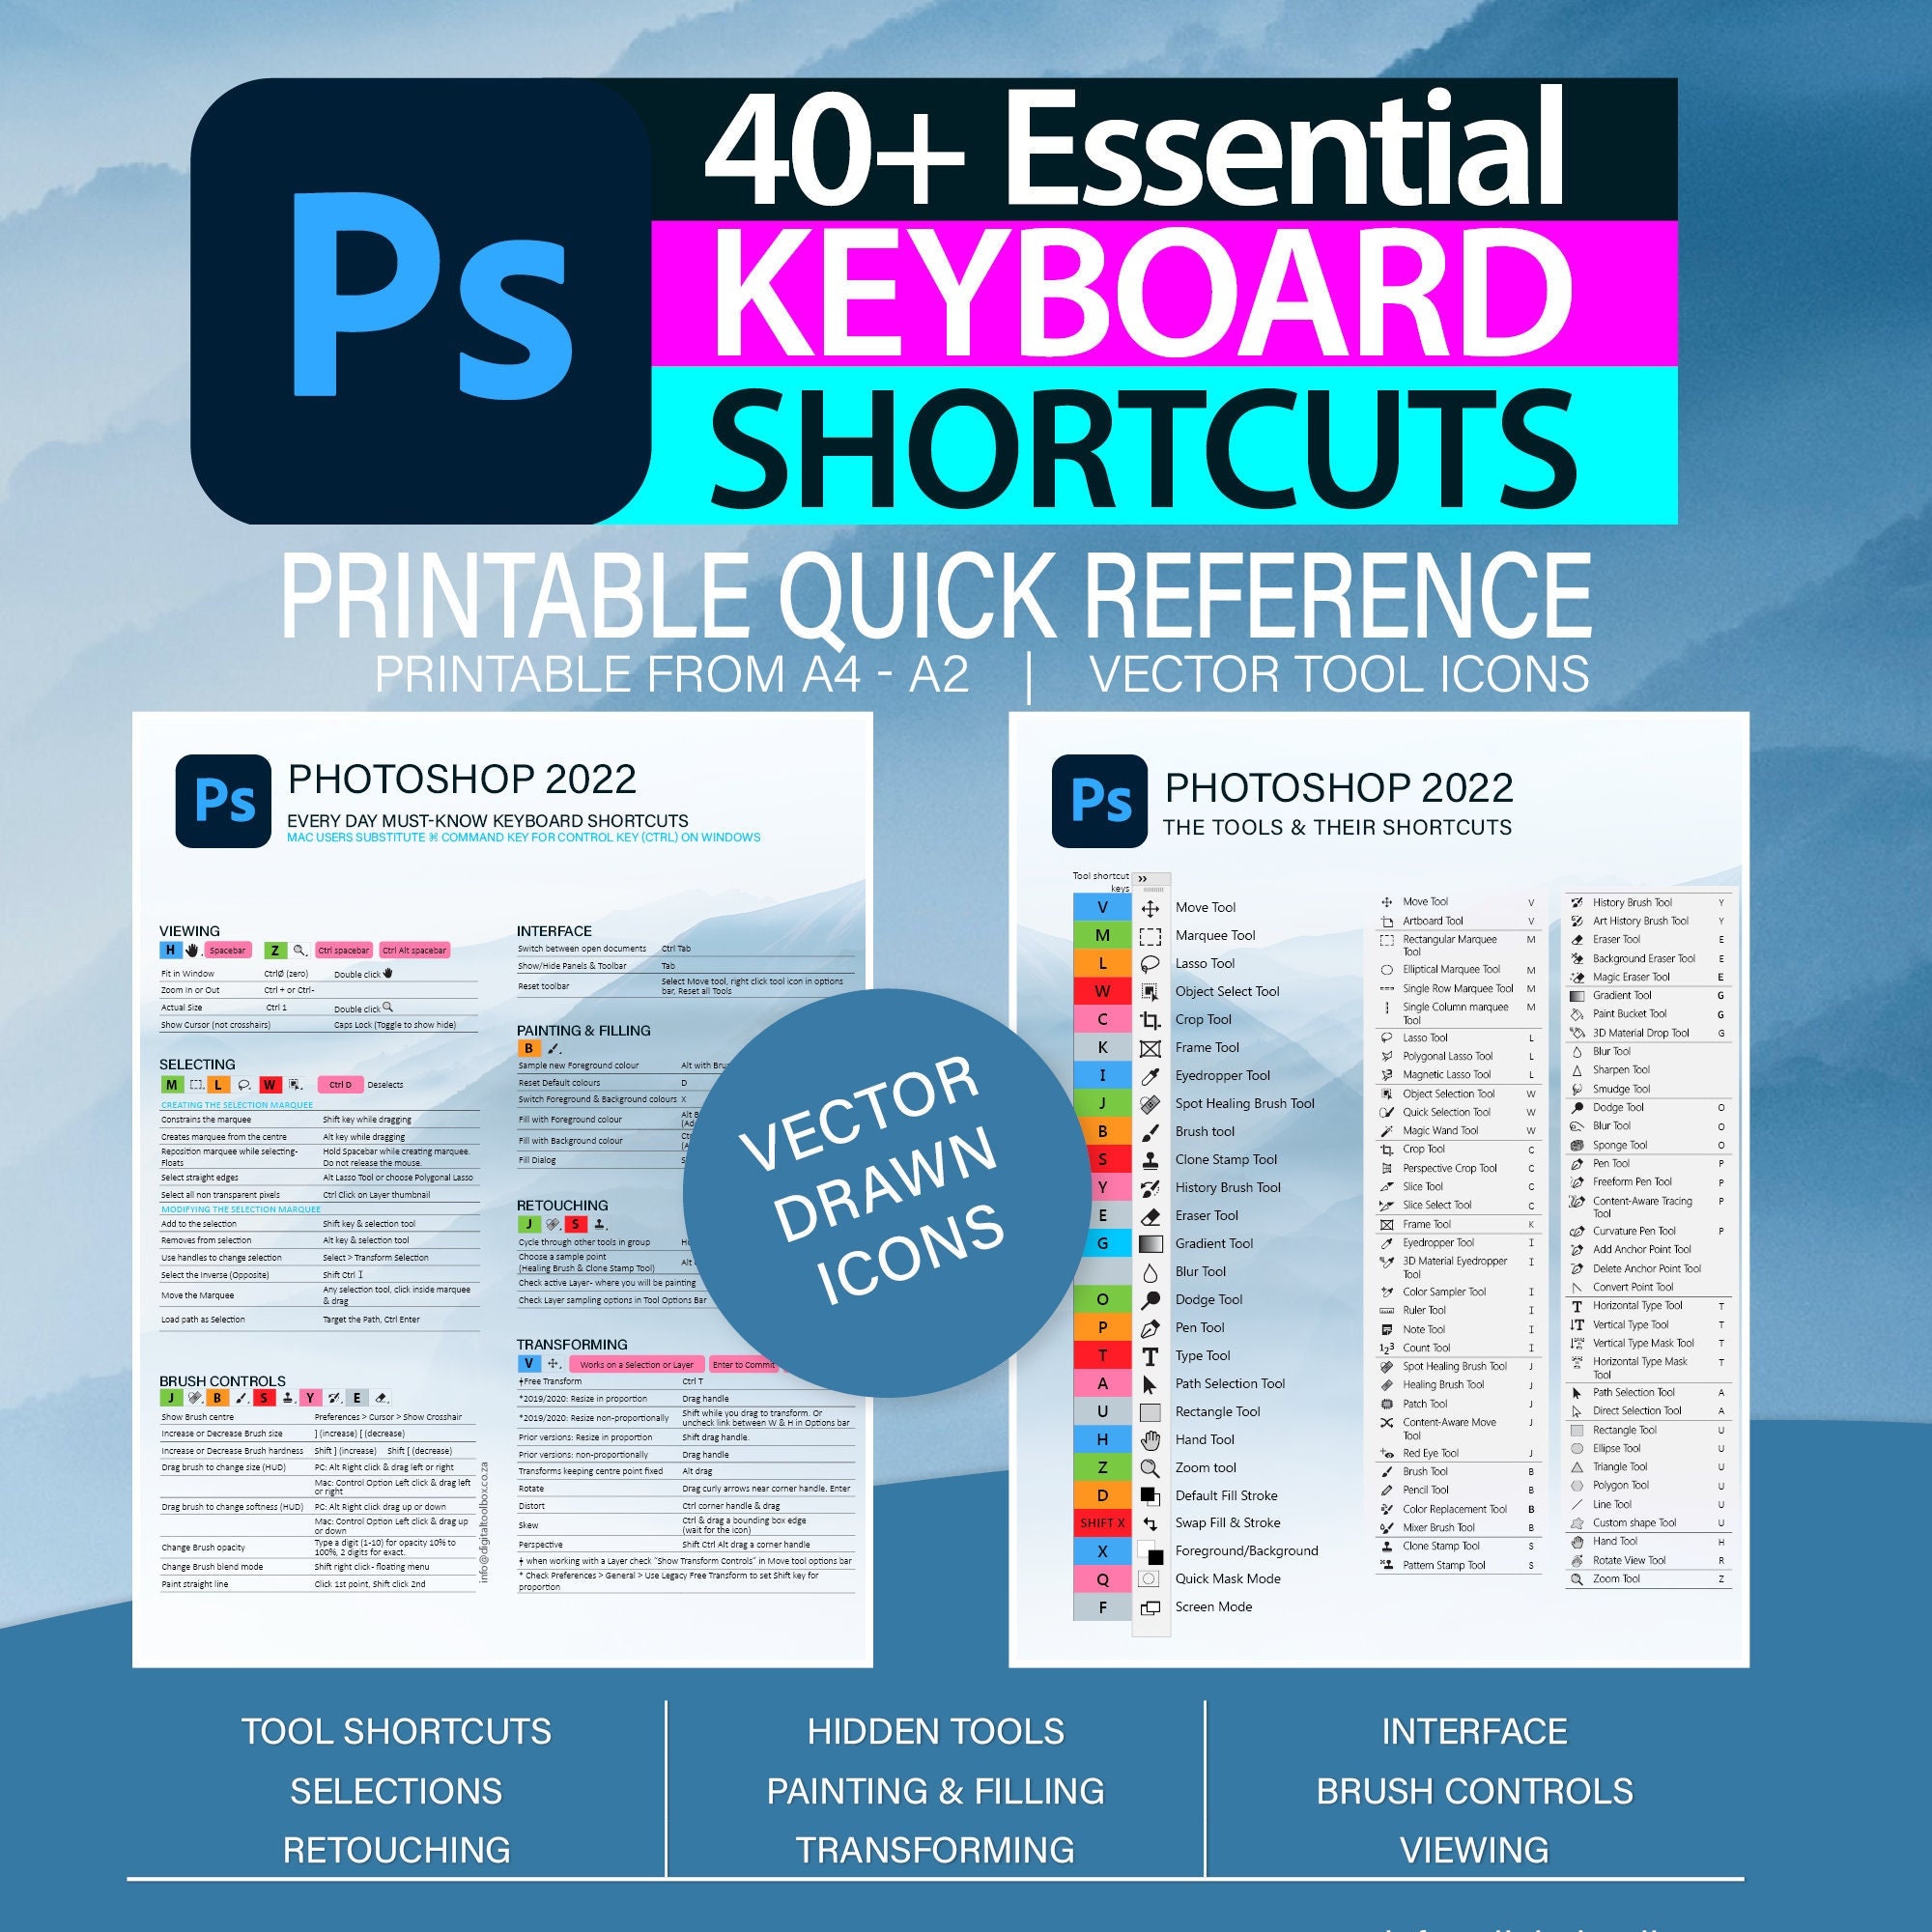 adobe-photoshop-2022-cheat-sheet-tools-tipsquick-reference-etsy-canada